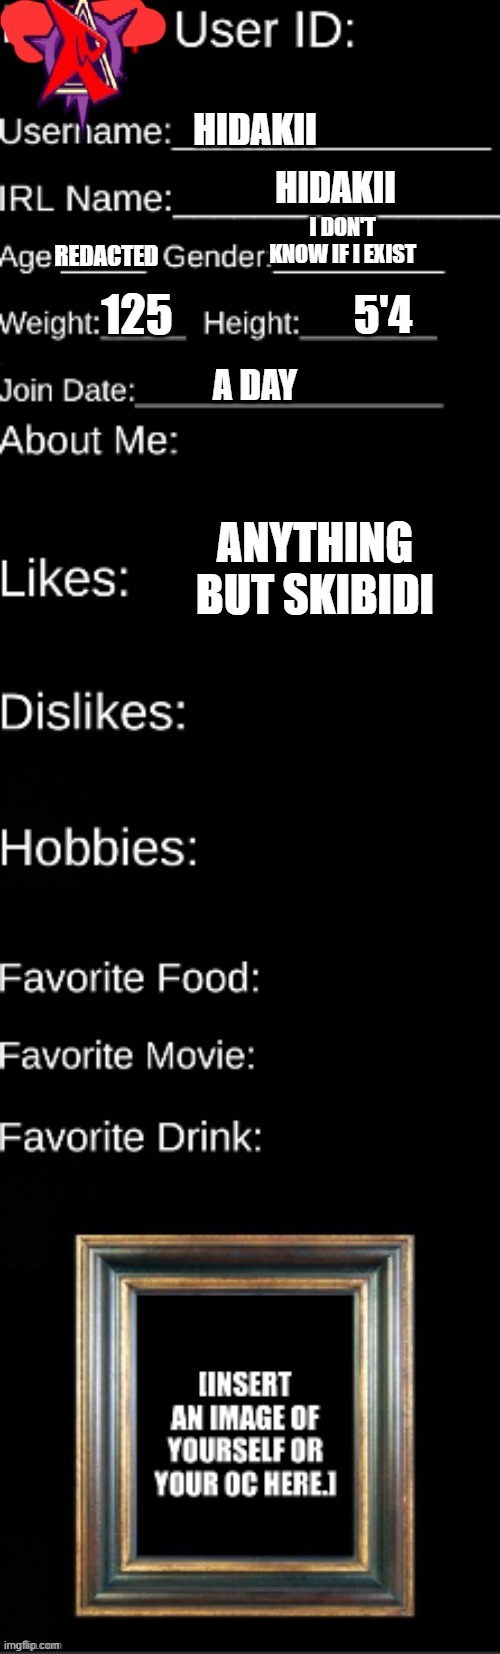 Official agl id | HIDAKII; HIDAKII; I DON'T KNOW IF I EXIST; REDACTED; 125; 5'4; A DAY; ANYTHING BUT SKIBIDI | image tagged in official agl id | made w/ Imgflip meme maker